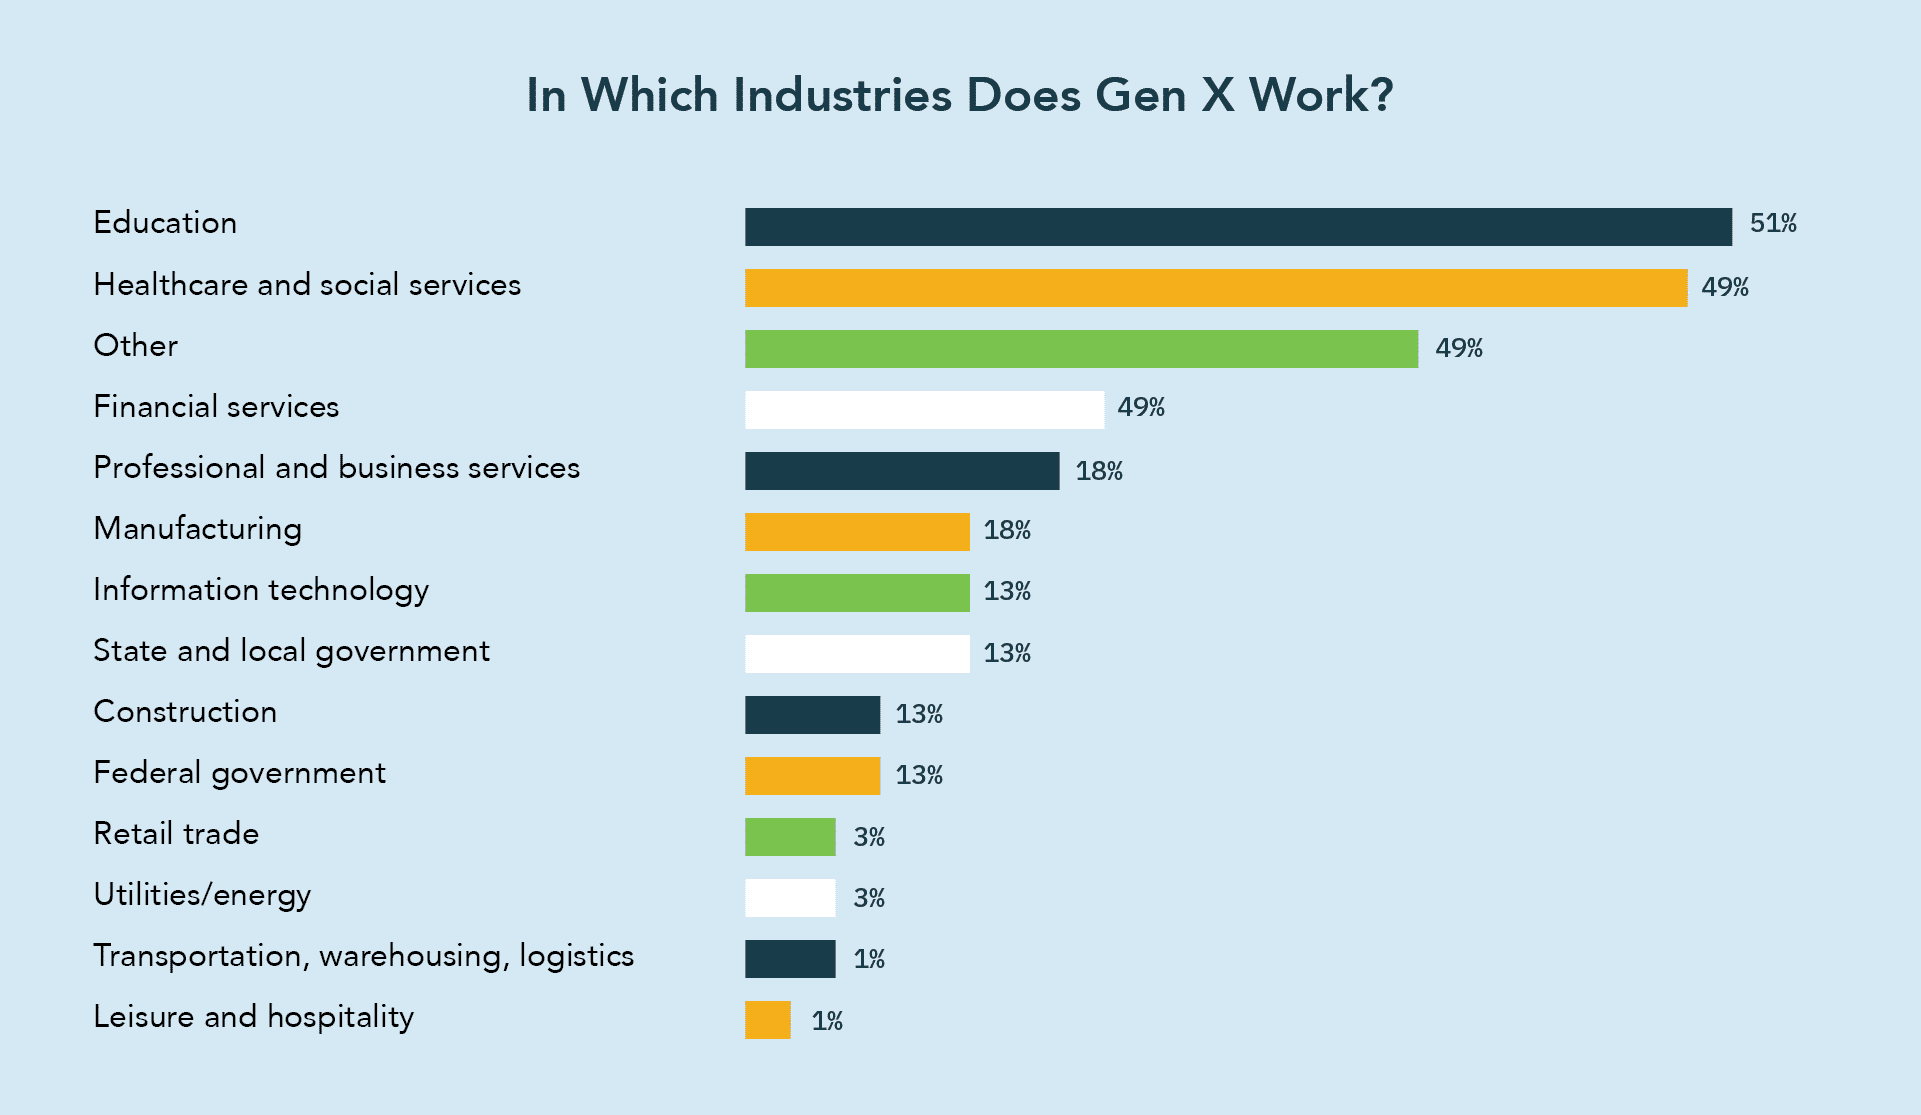 A graph depicting in which industries Gen X works, with the largest number being in education.